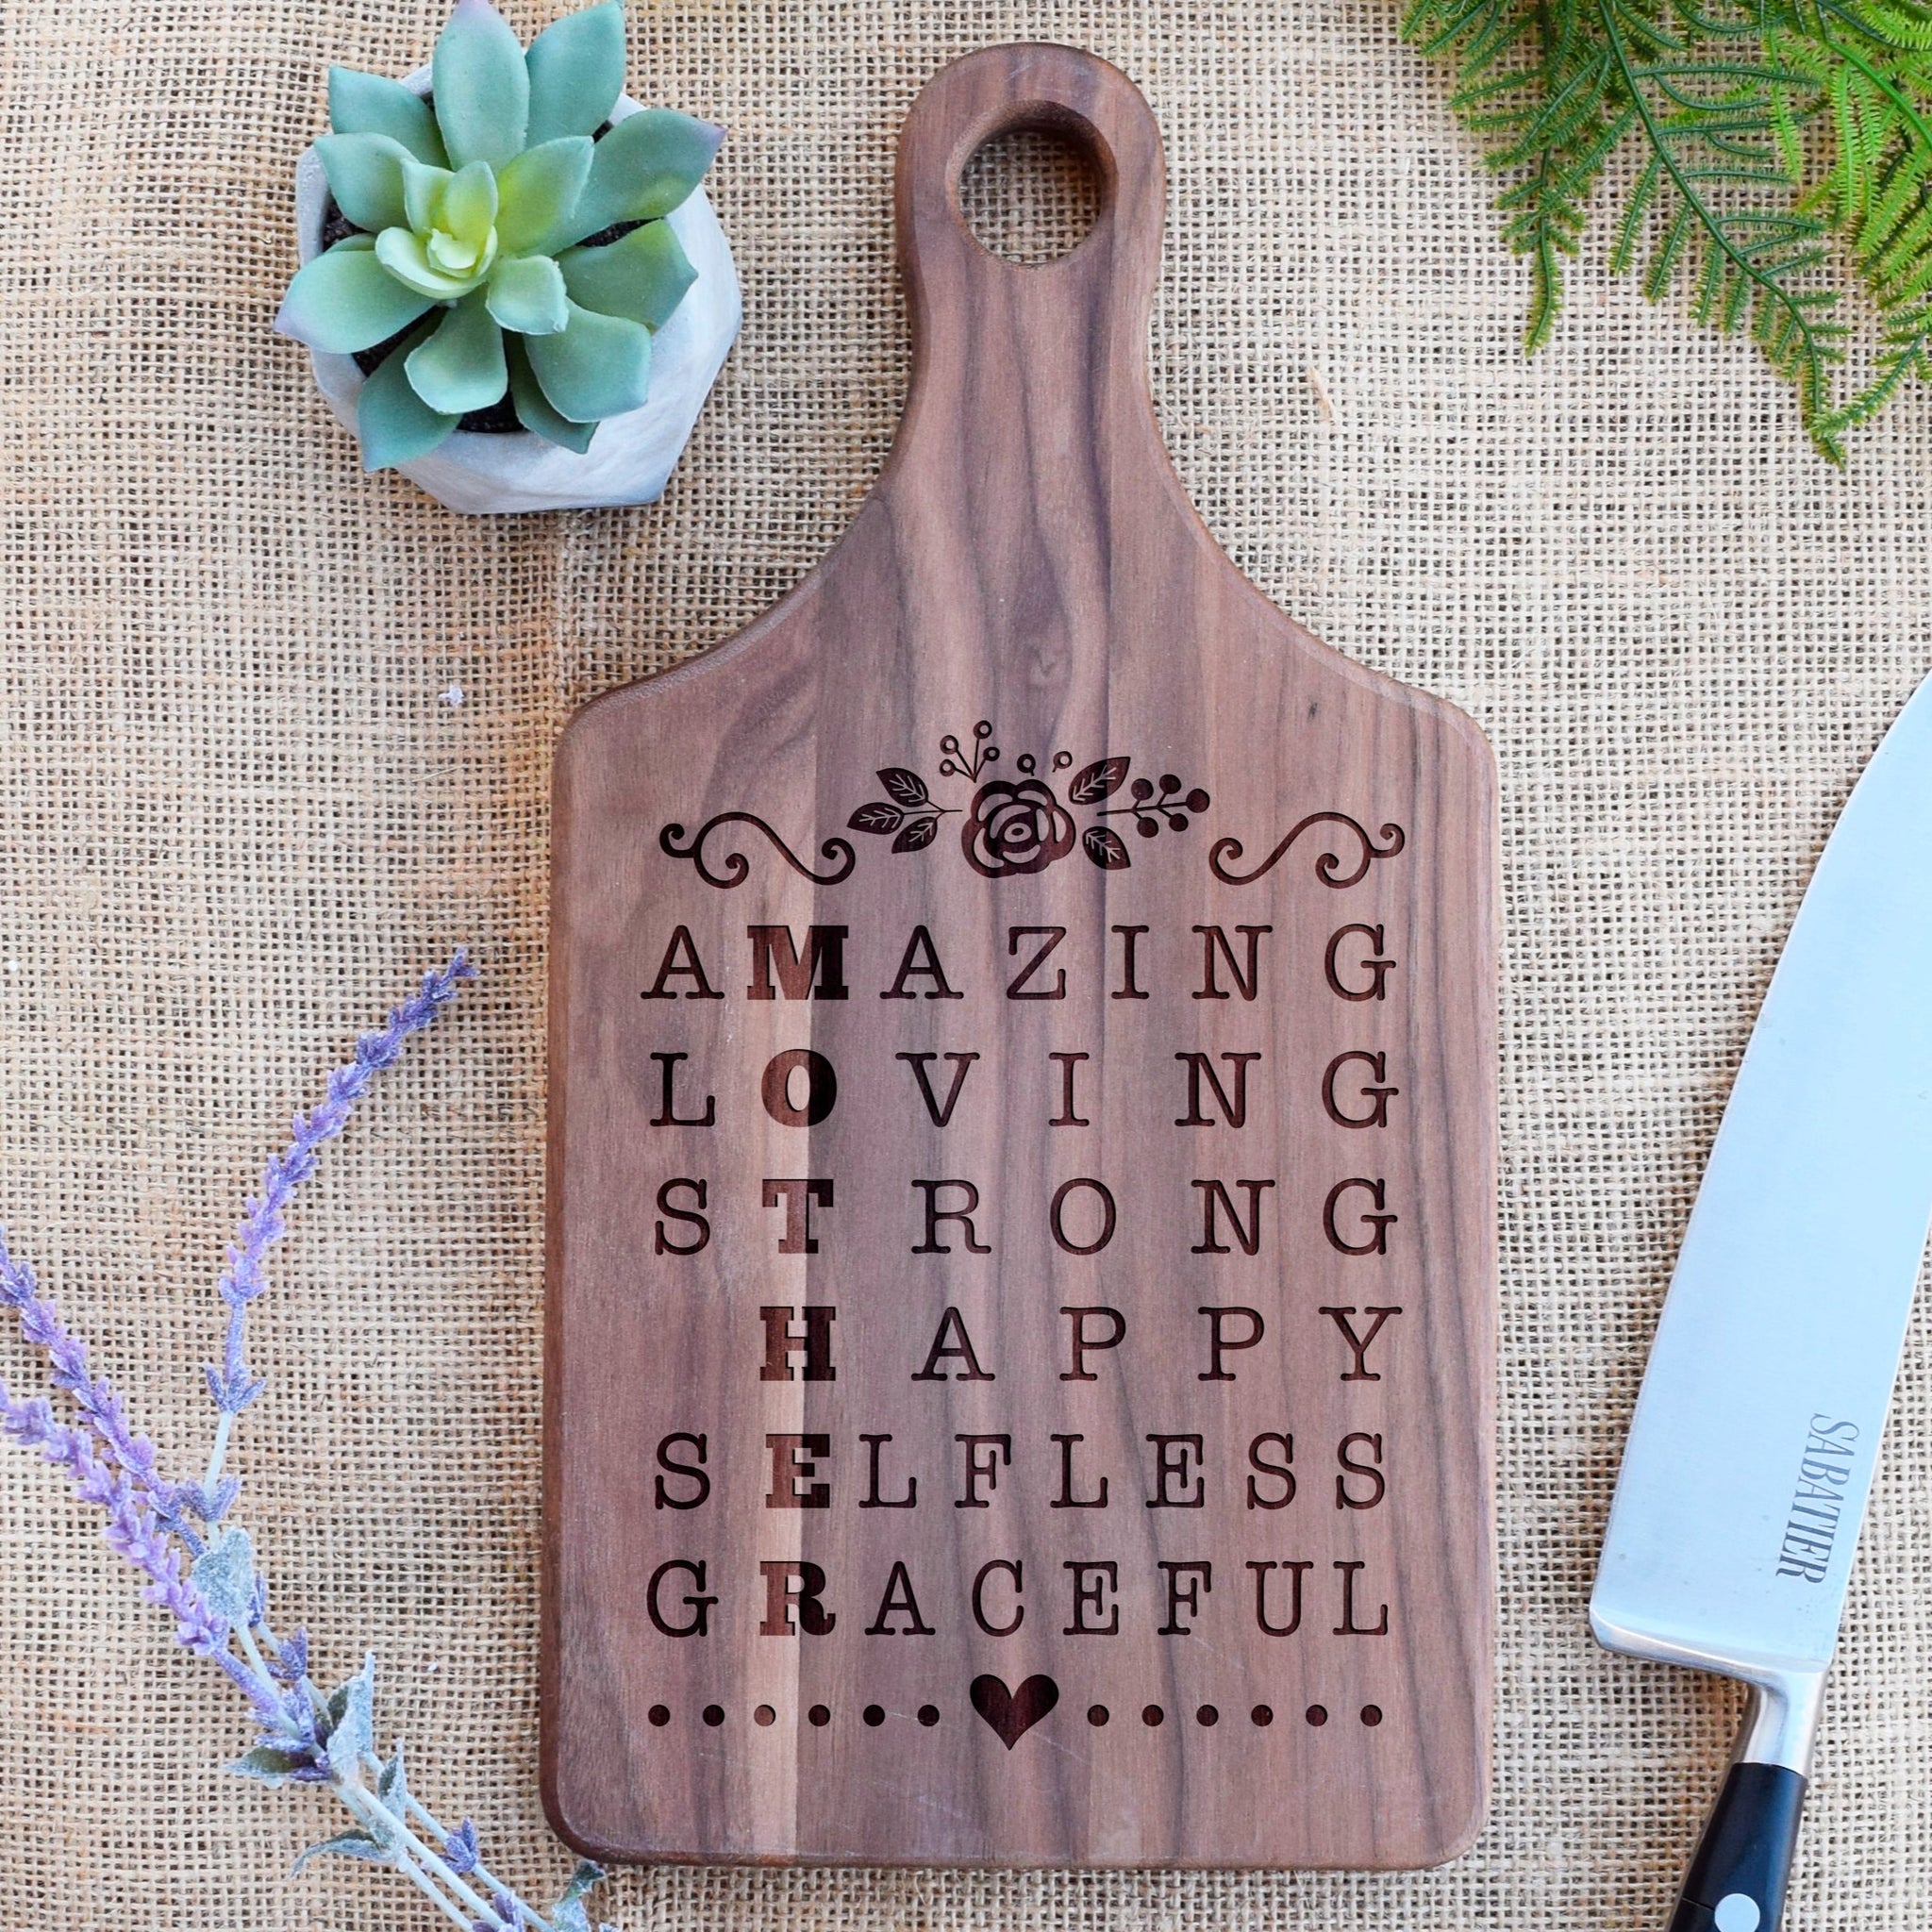 We Love You Mom Mothers Day Bamboo Paddle Cutting Board